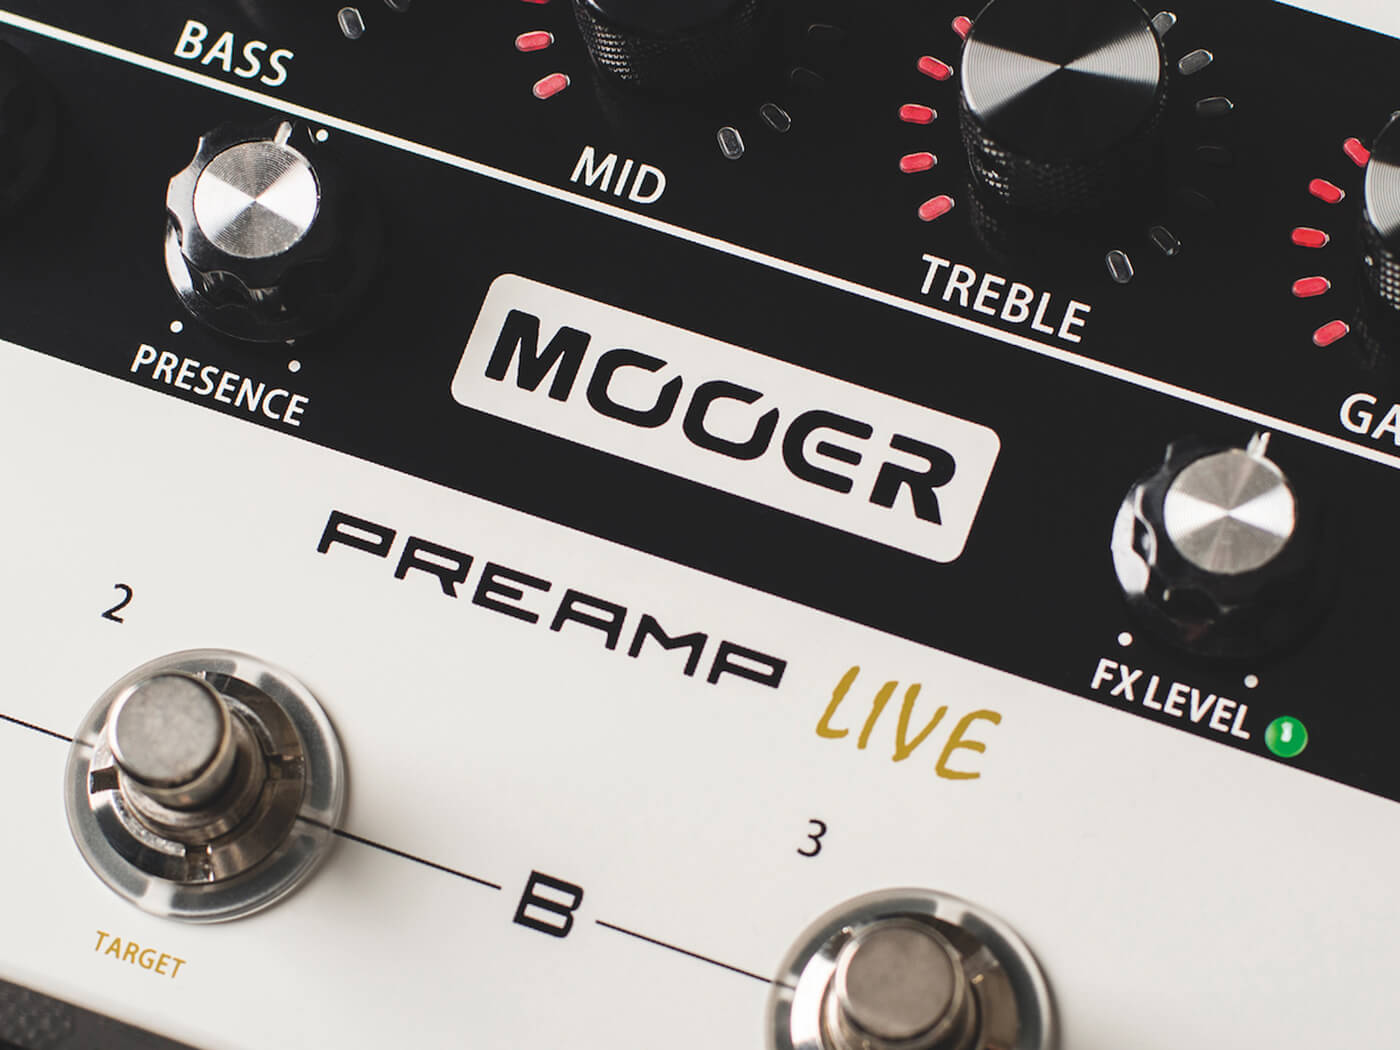 Mooer Preamp Live